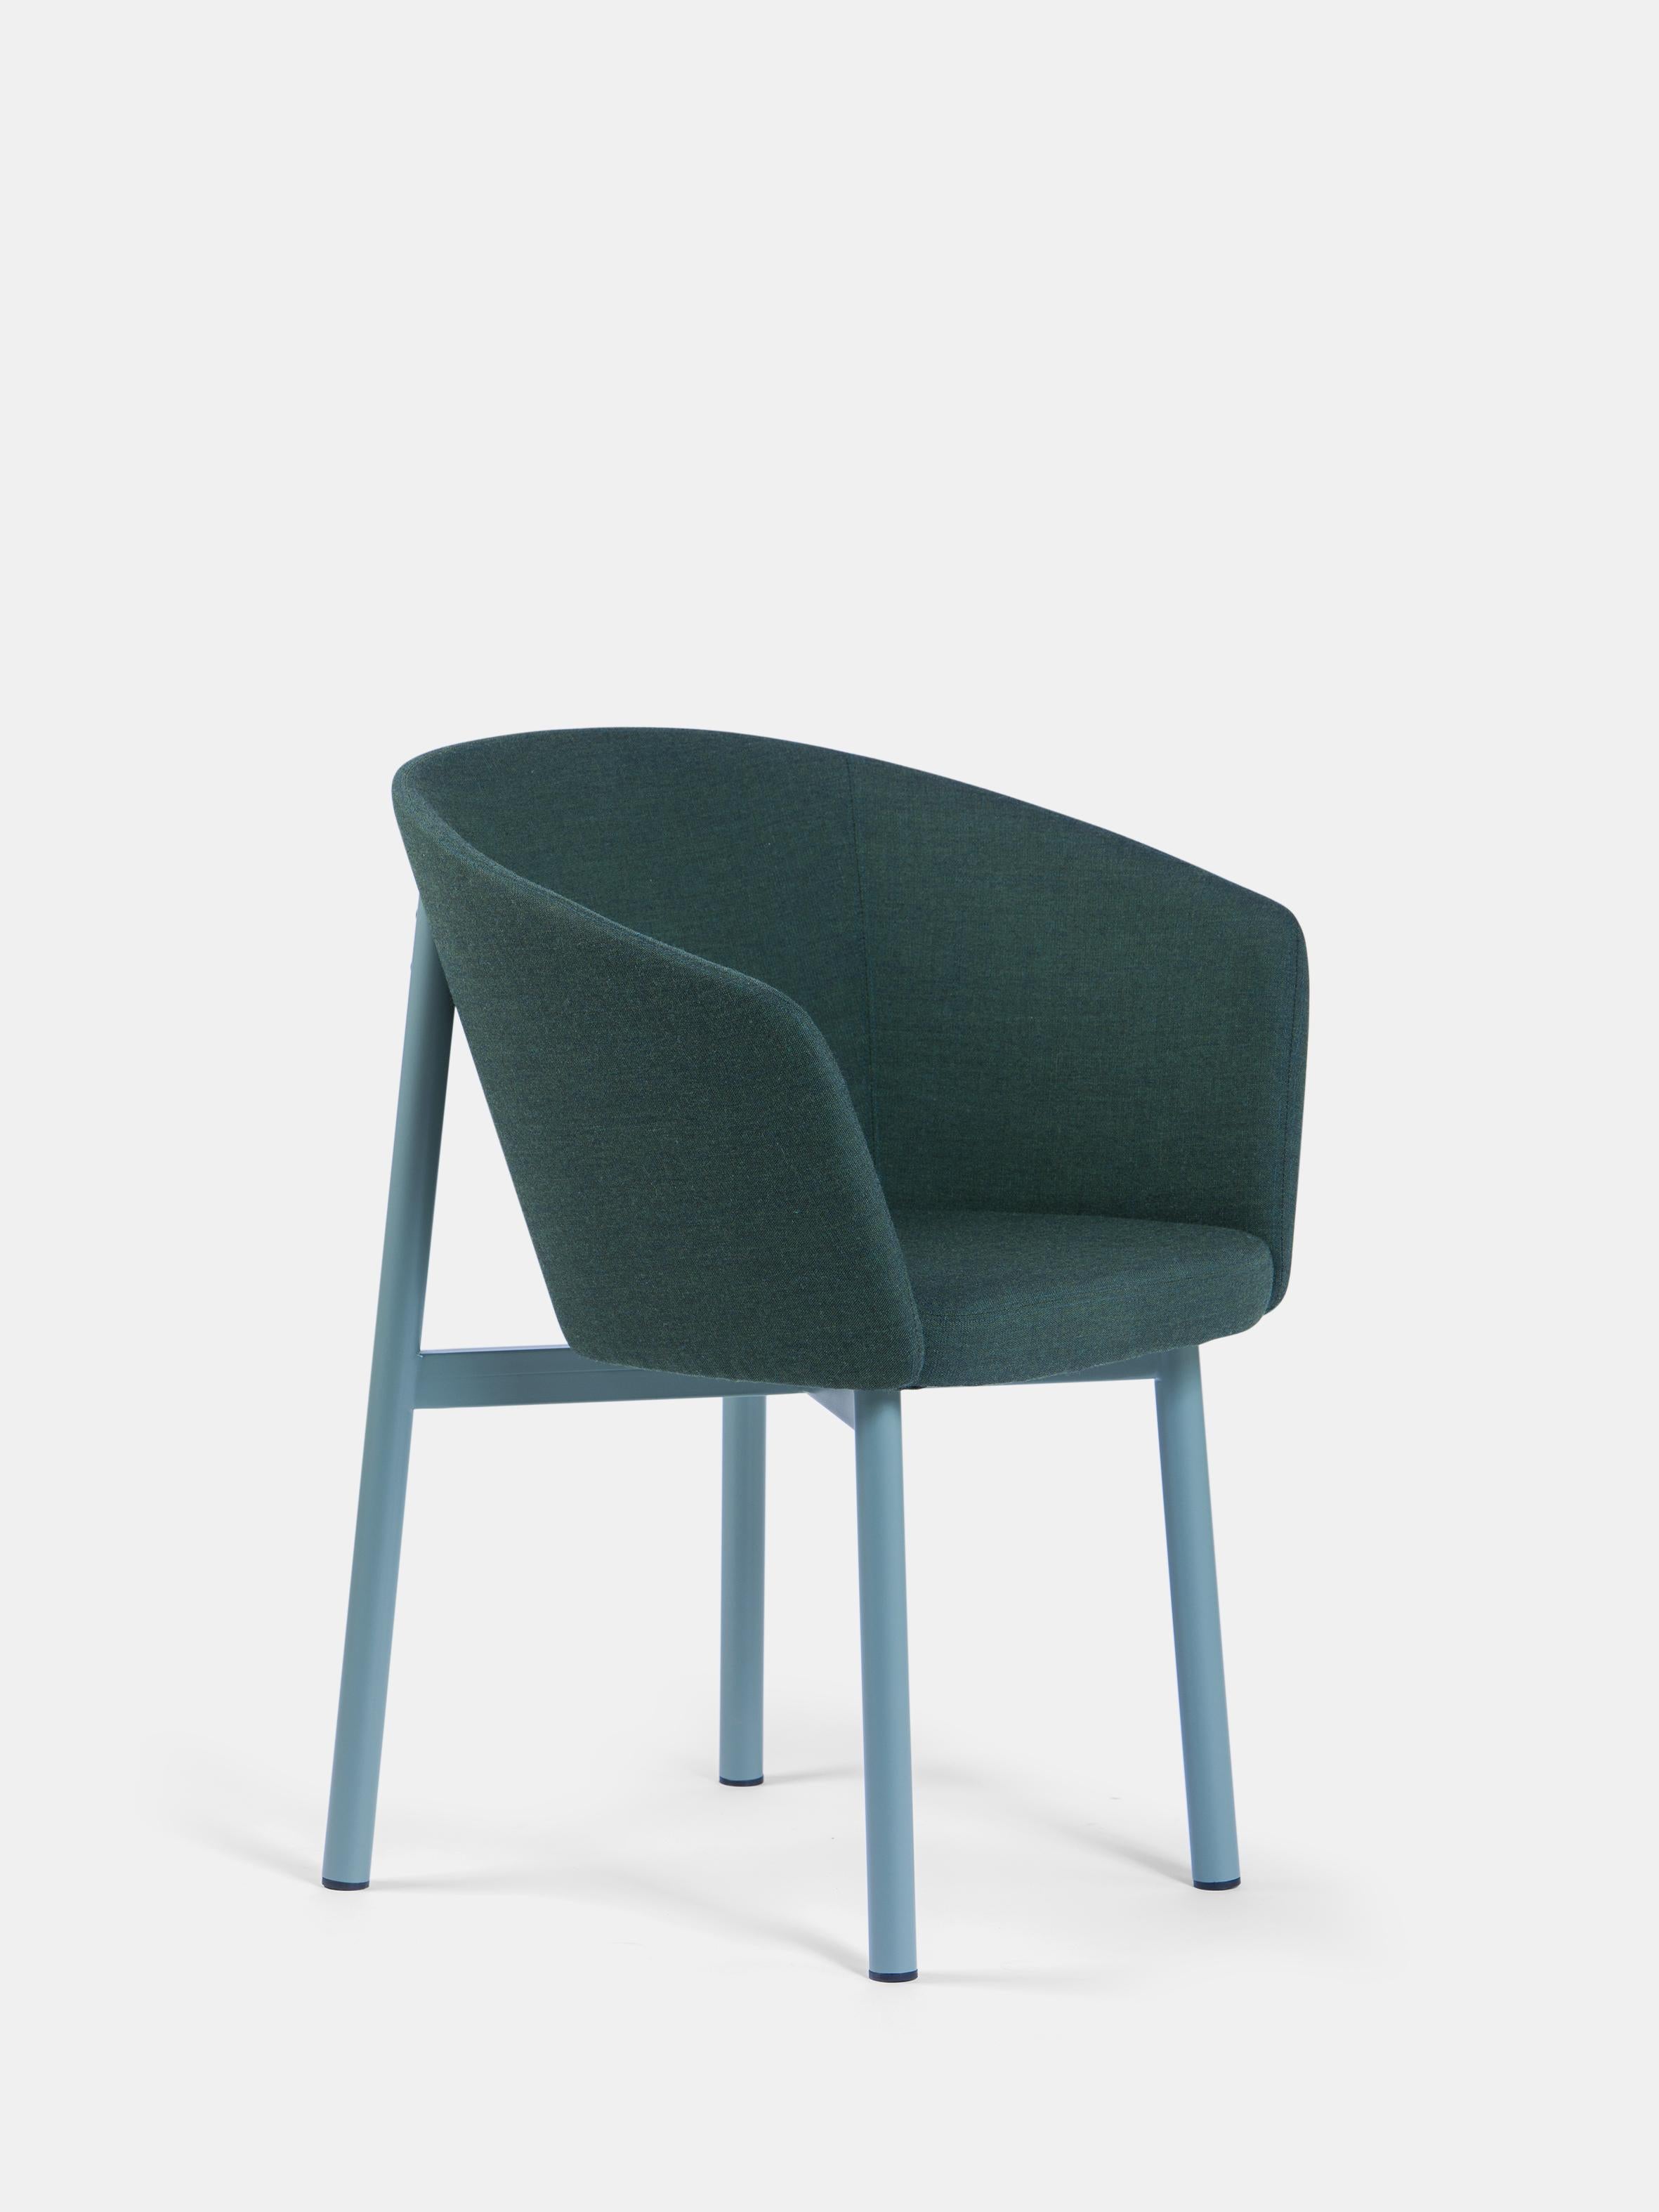 Set of 4 Green Residence Bridge Armchair by Kann Design
Dimensions: D 52 x W 59.5 x H 80 cm.
Materials: Steel tube, HR foam, fabric upholstery Kvadrat Canvas 996 (90% wool, 10% nylon).
Available in other fabrics.

All of the Residence seats were